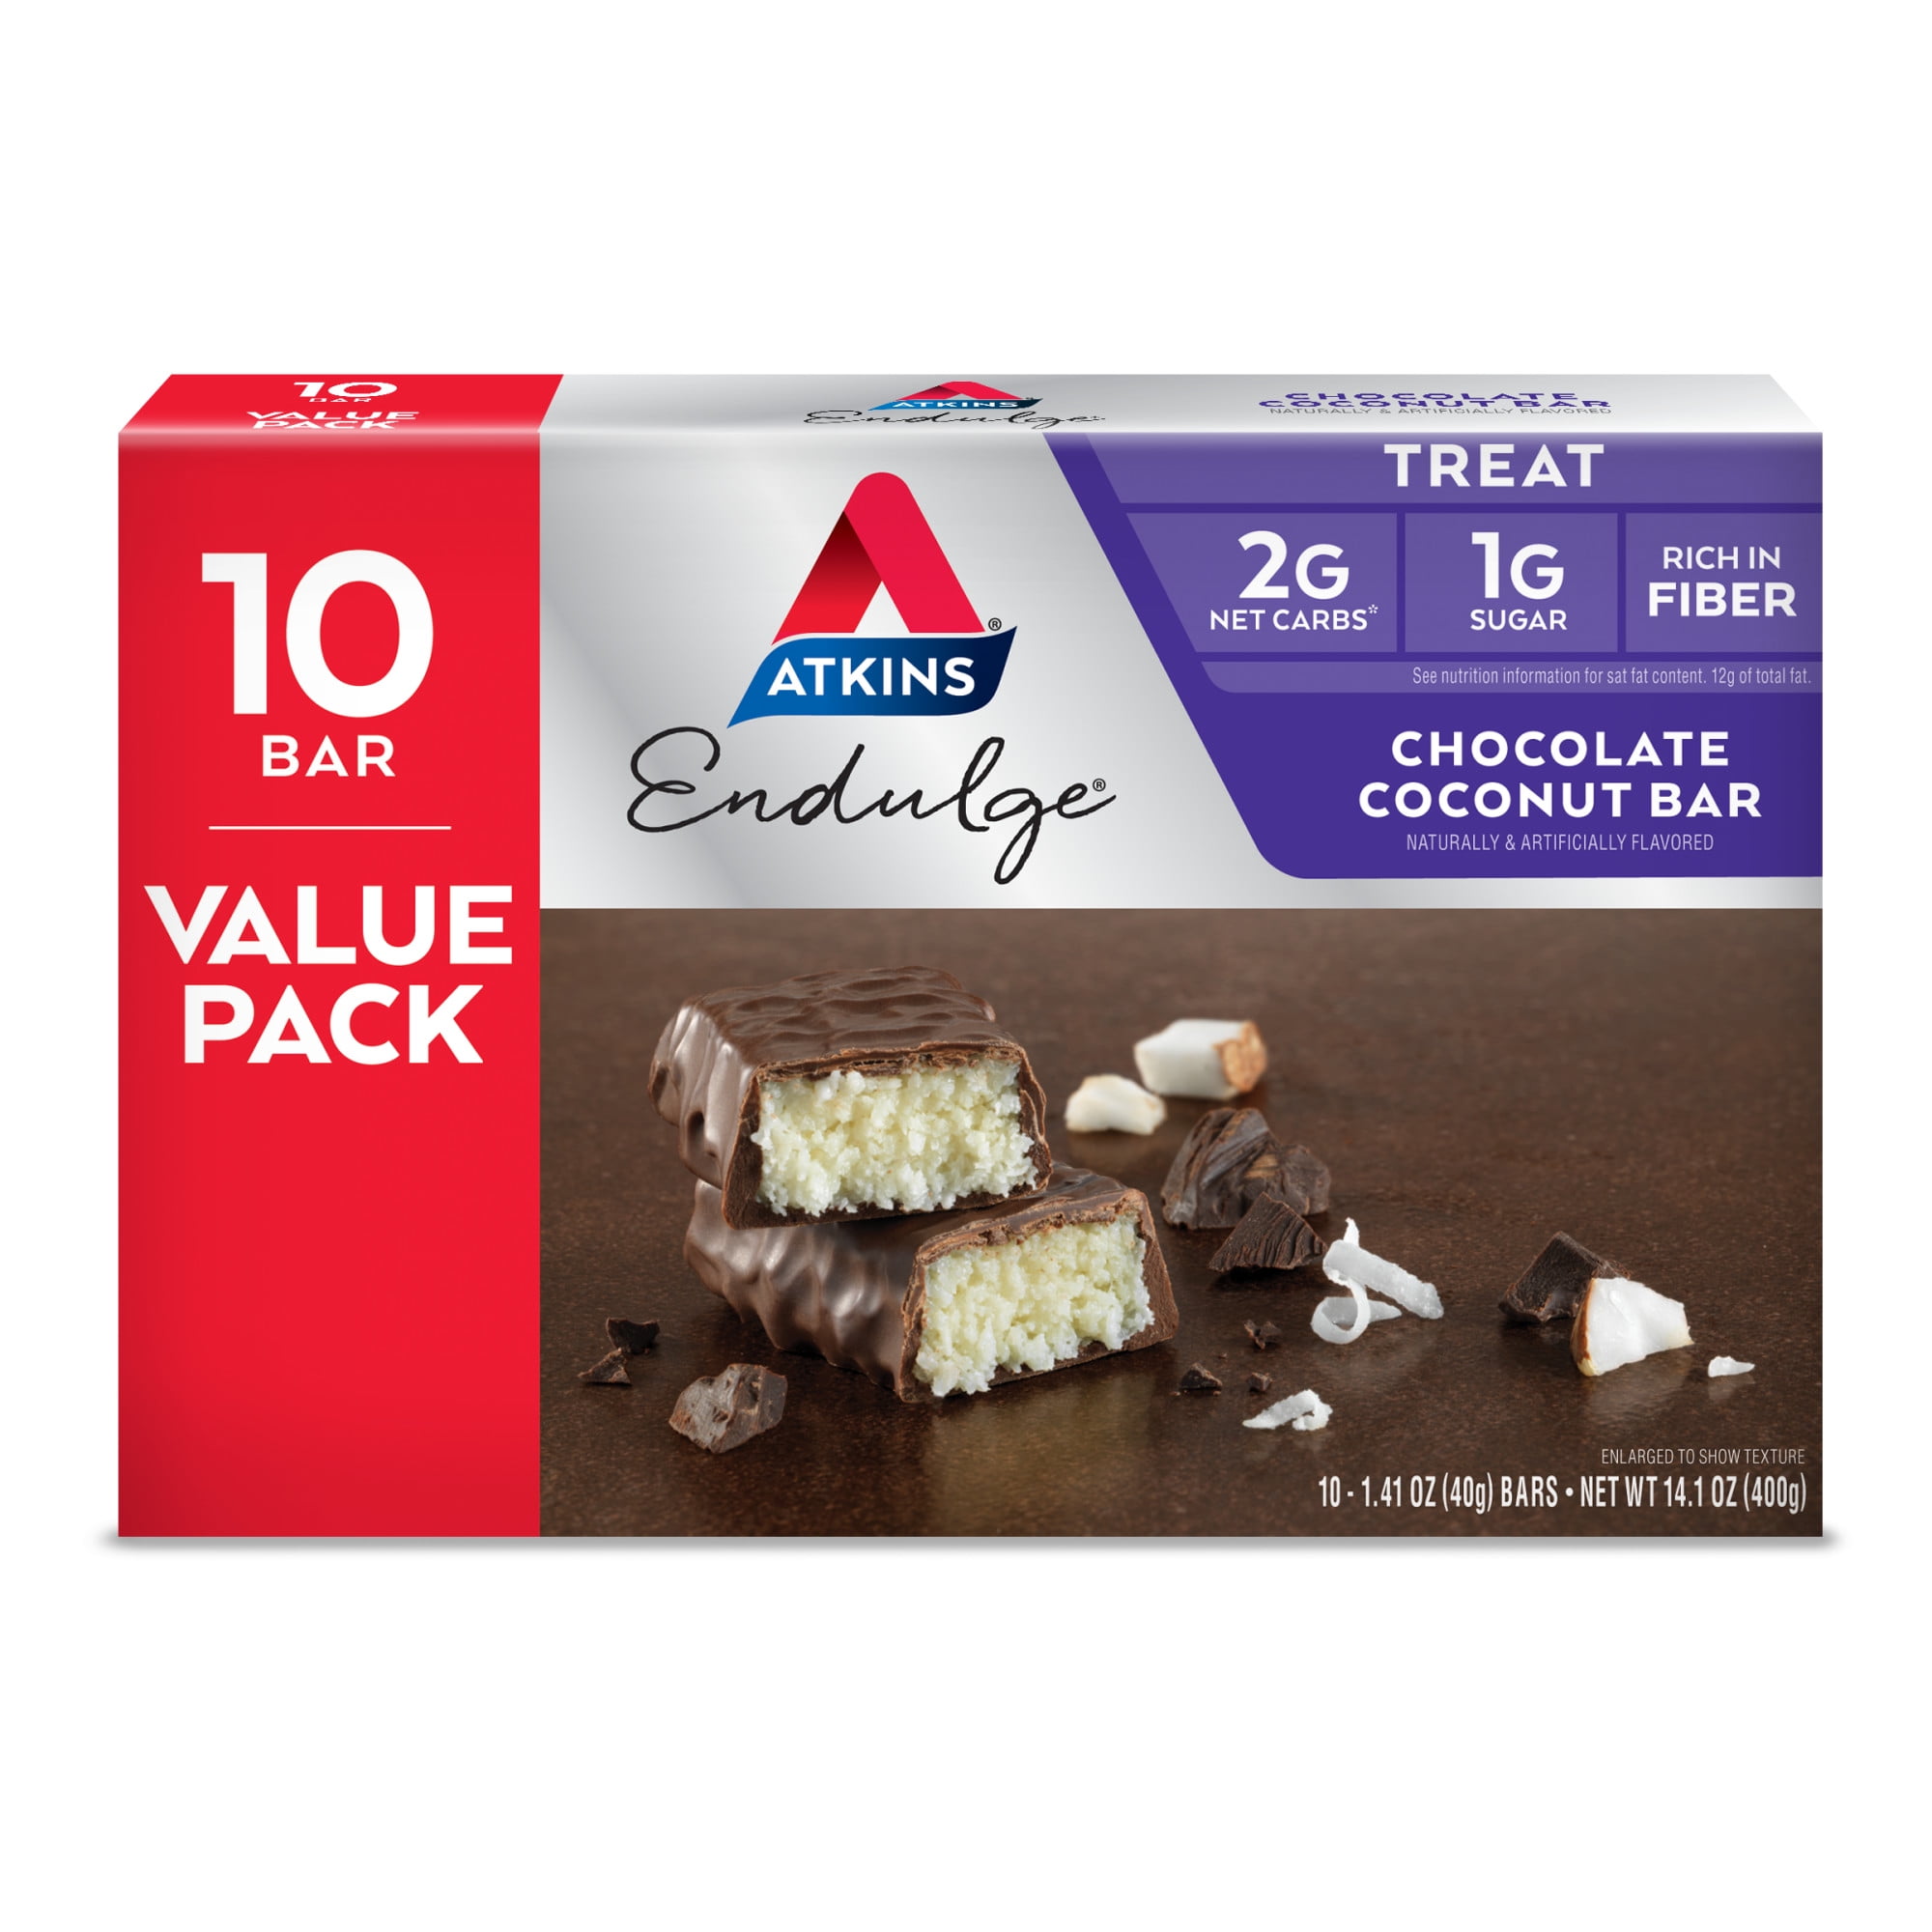 Atkins Endulge Treat, Chocolate Coconut Bar, Keto Friendly, 10 Count (Value Pack)